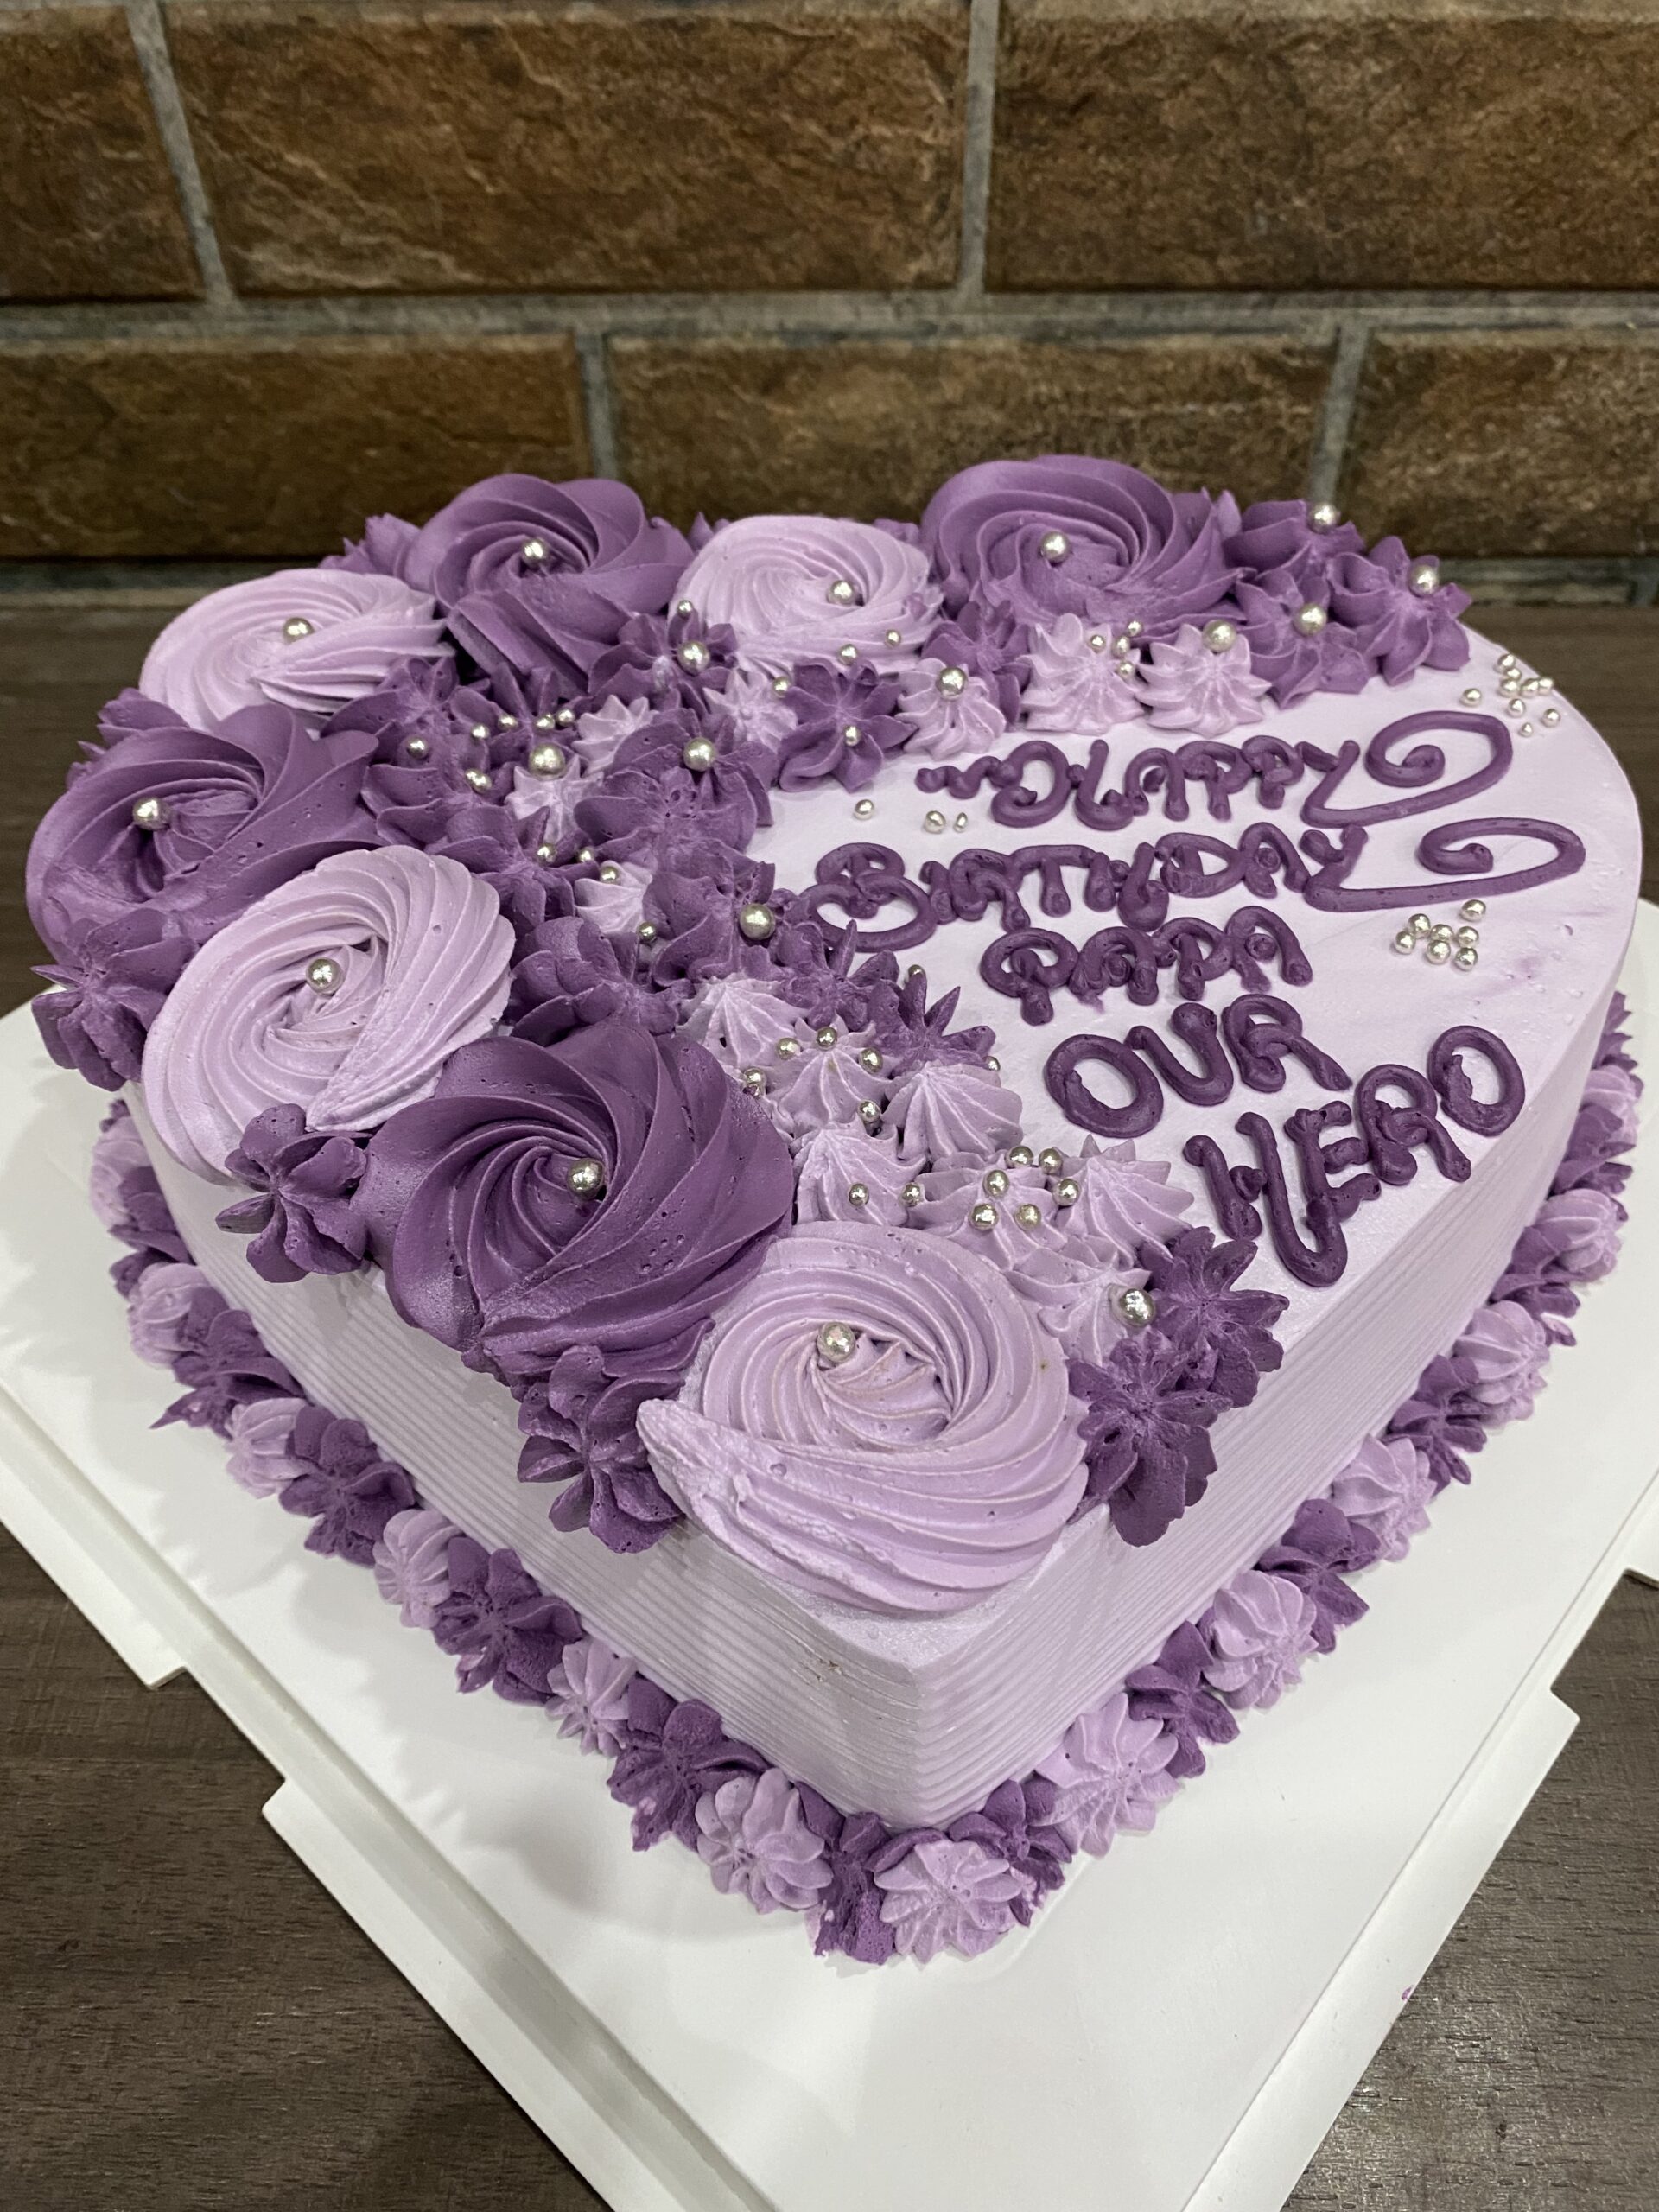 50 Best Birthday Cake Ideas in 2022 : Lavender Coloured Cake with  Butterflies & Pearls